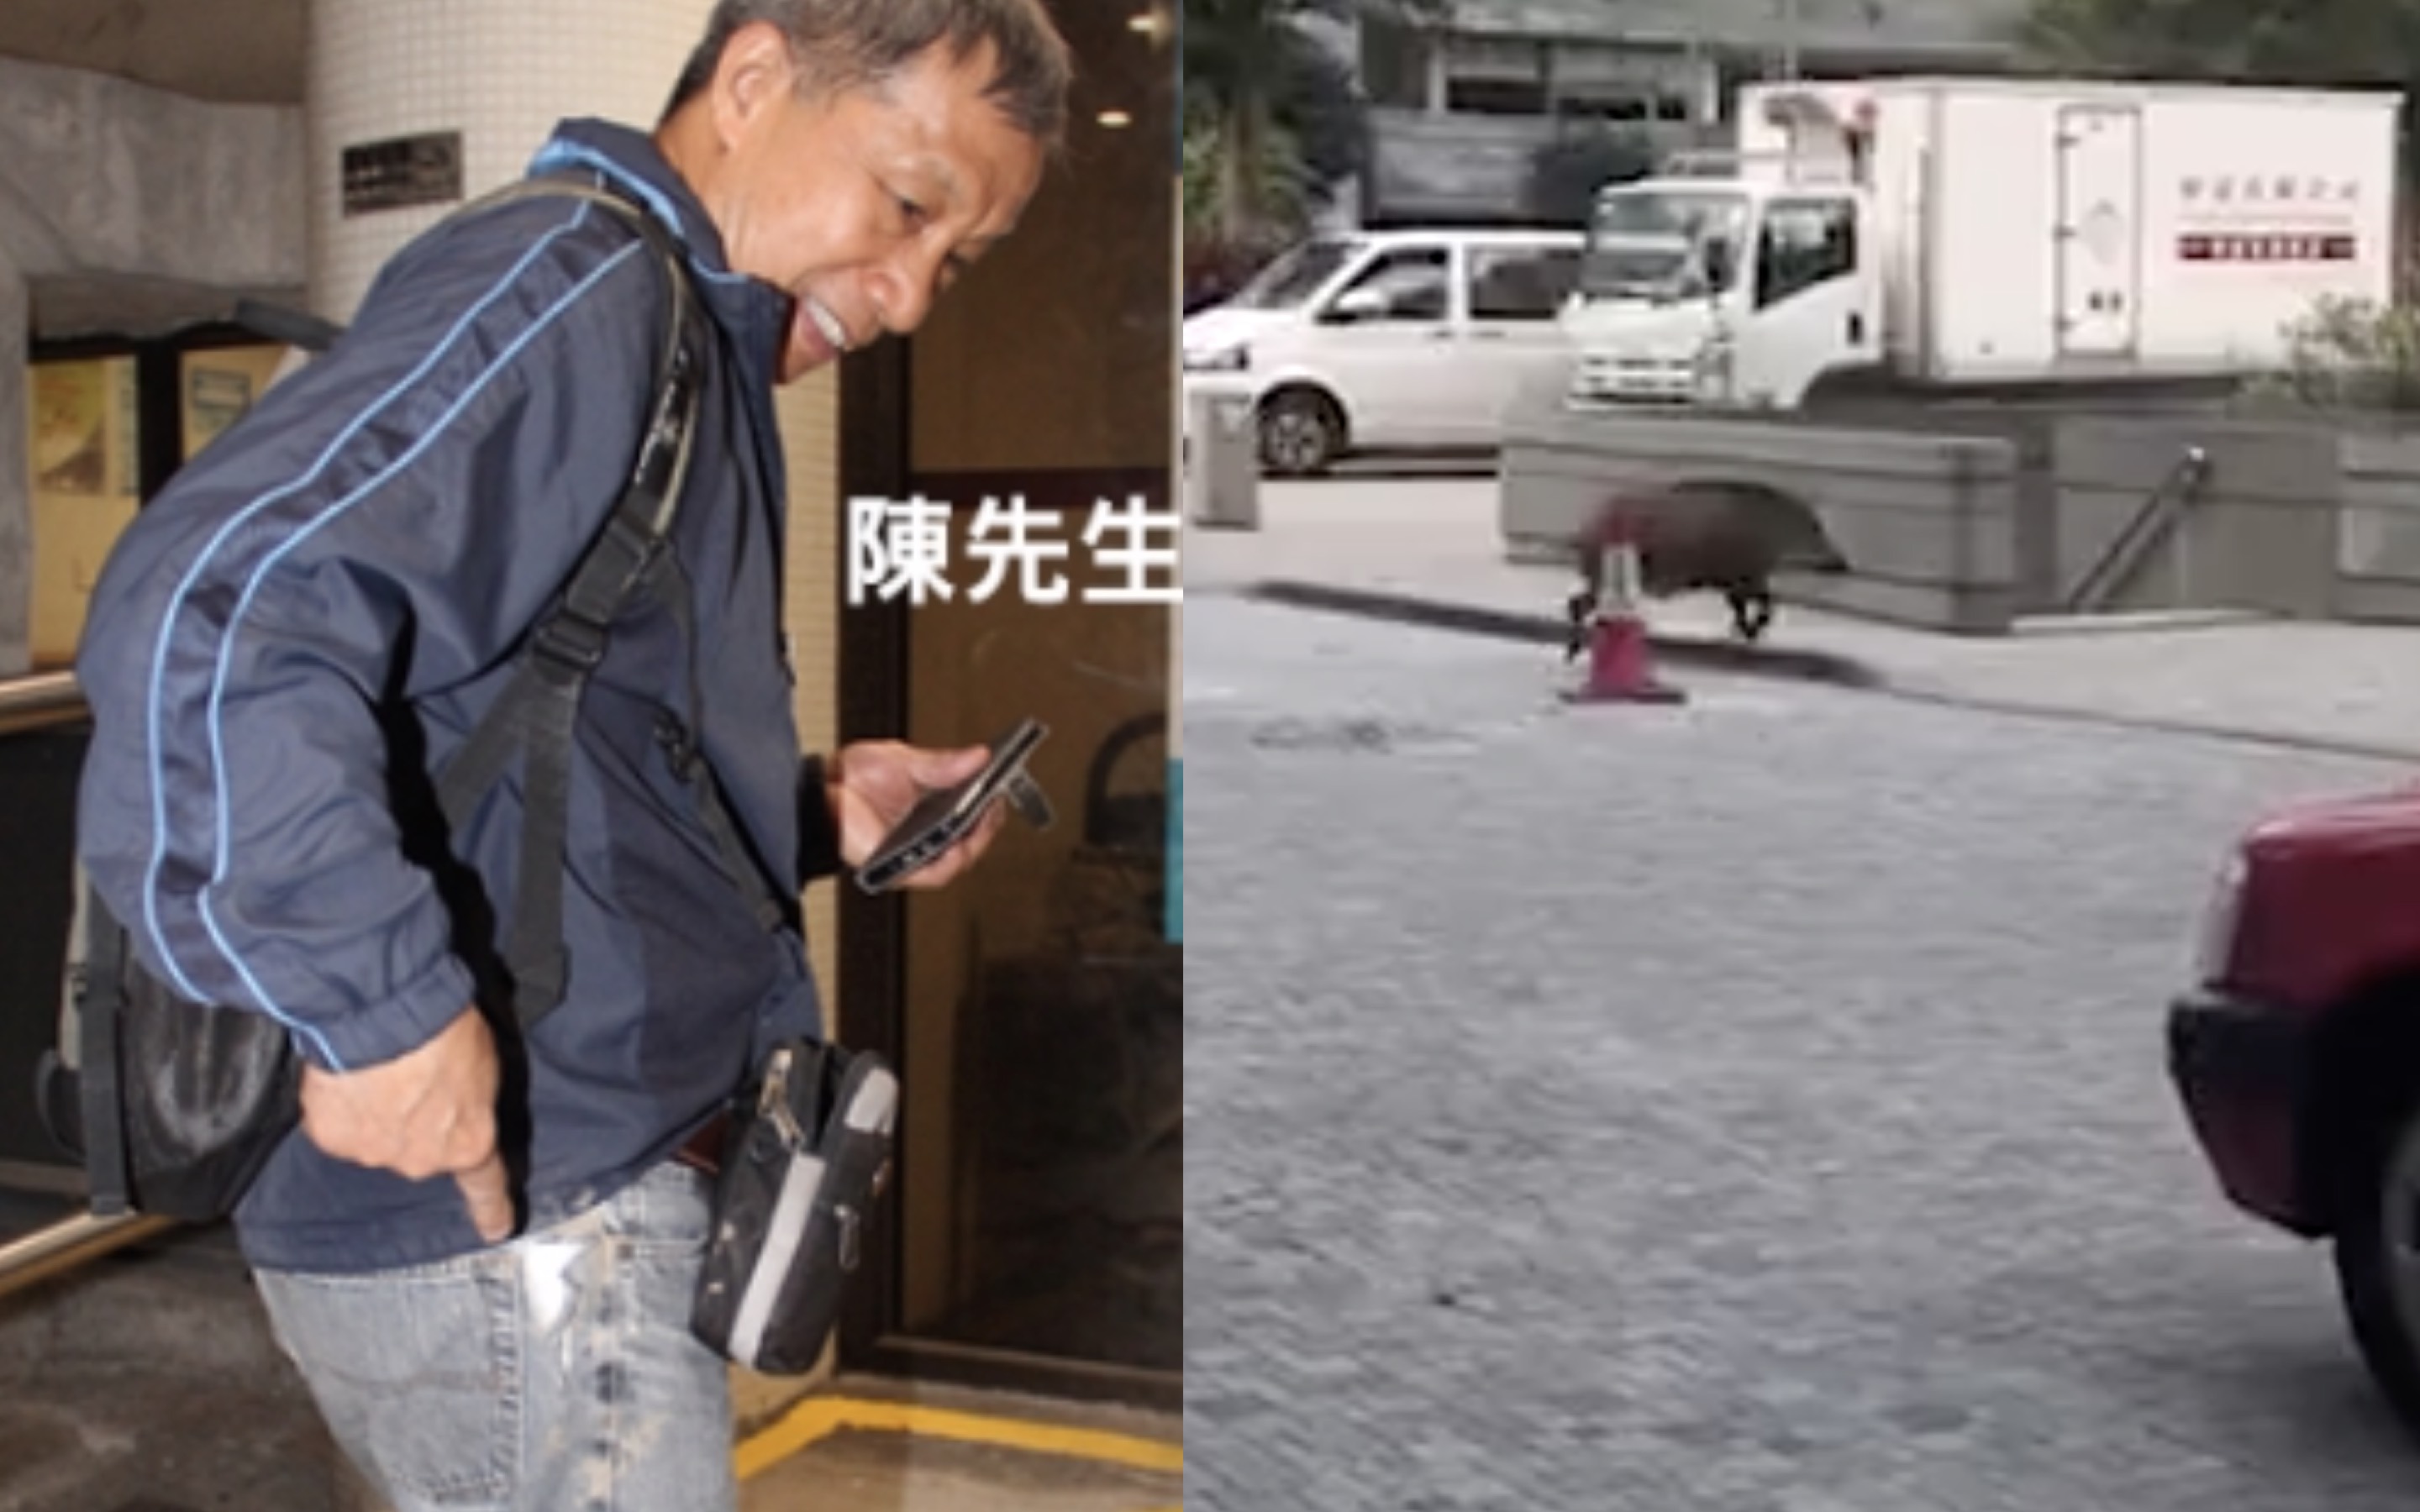 (Left) A 70-year-old man surnamed Chan shows off the tear in his jeans after he was bitten by a wild boar in Ap Lei Chau last night. (Right) A wild boar sighting in Admiralty earlier that day. Screengrabs via Apple Daily video.